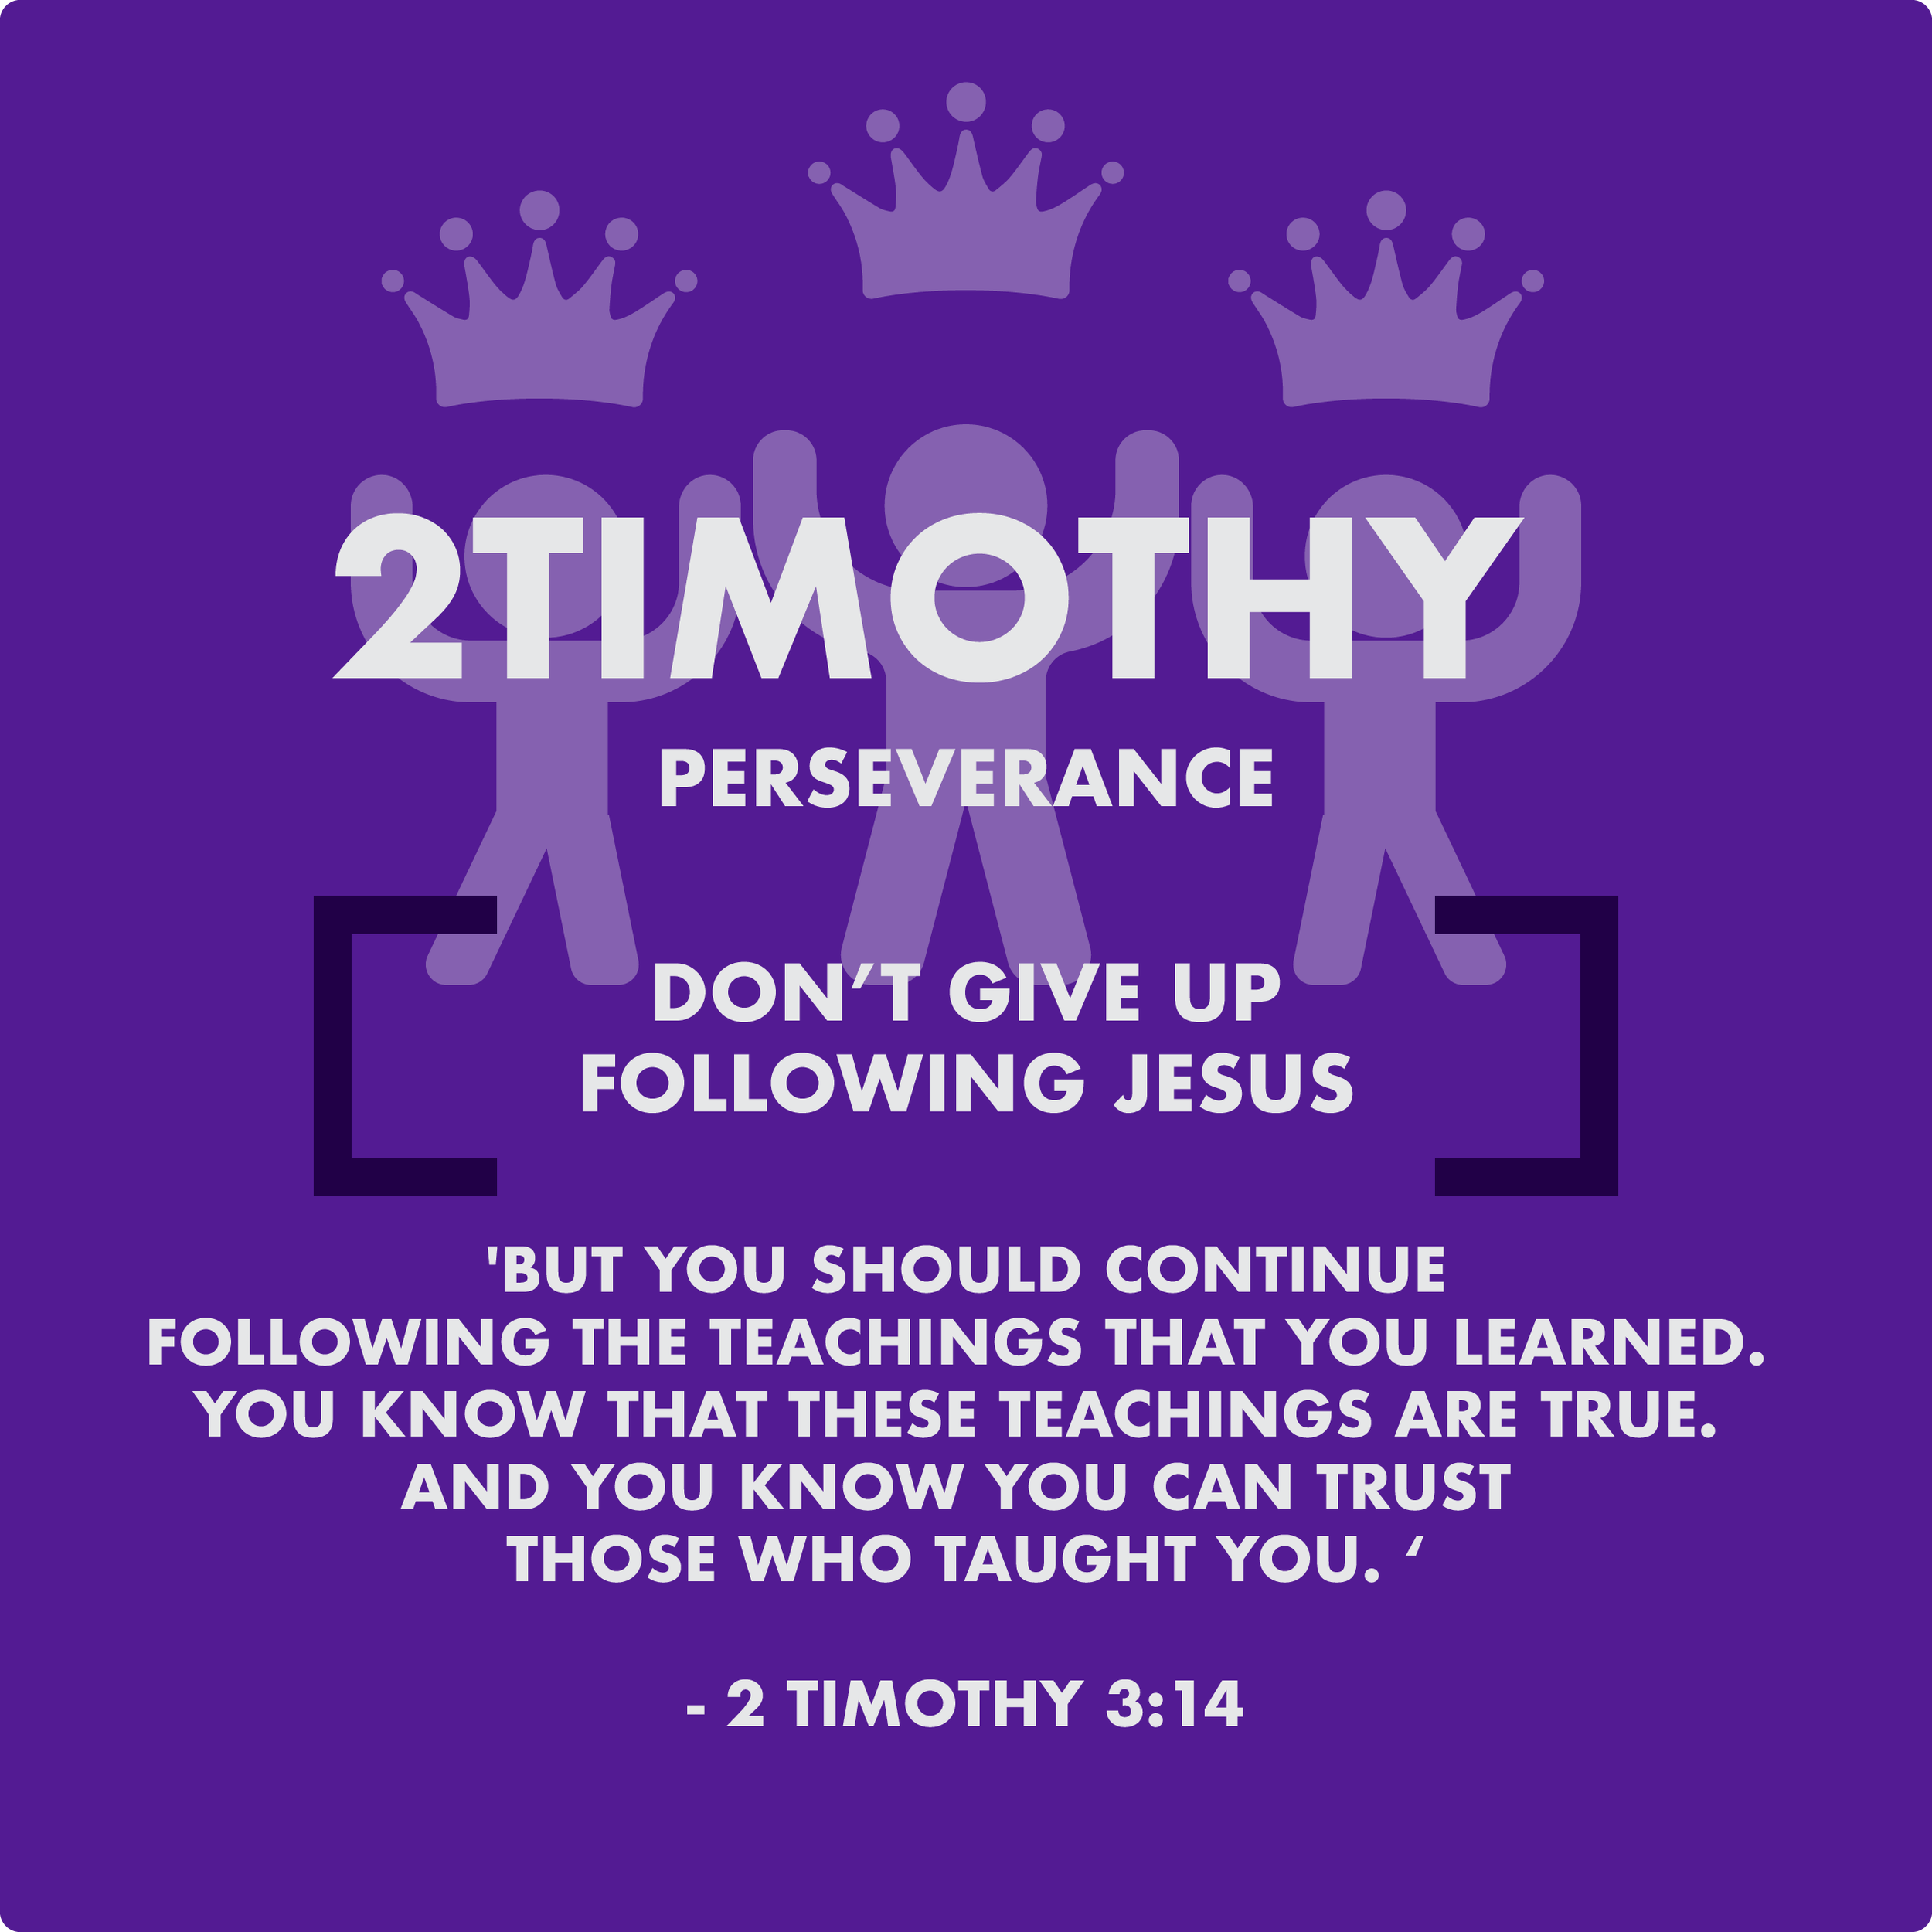 Books of the Bible_posters_53 2Timothy.png